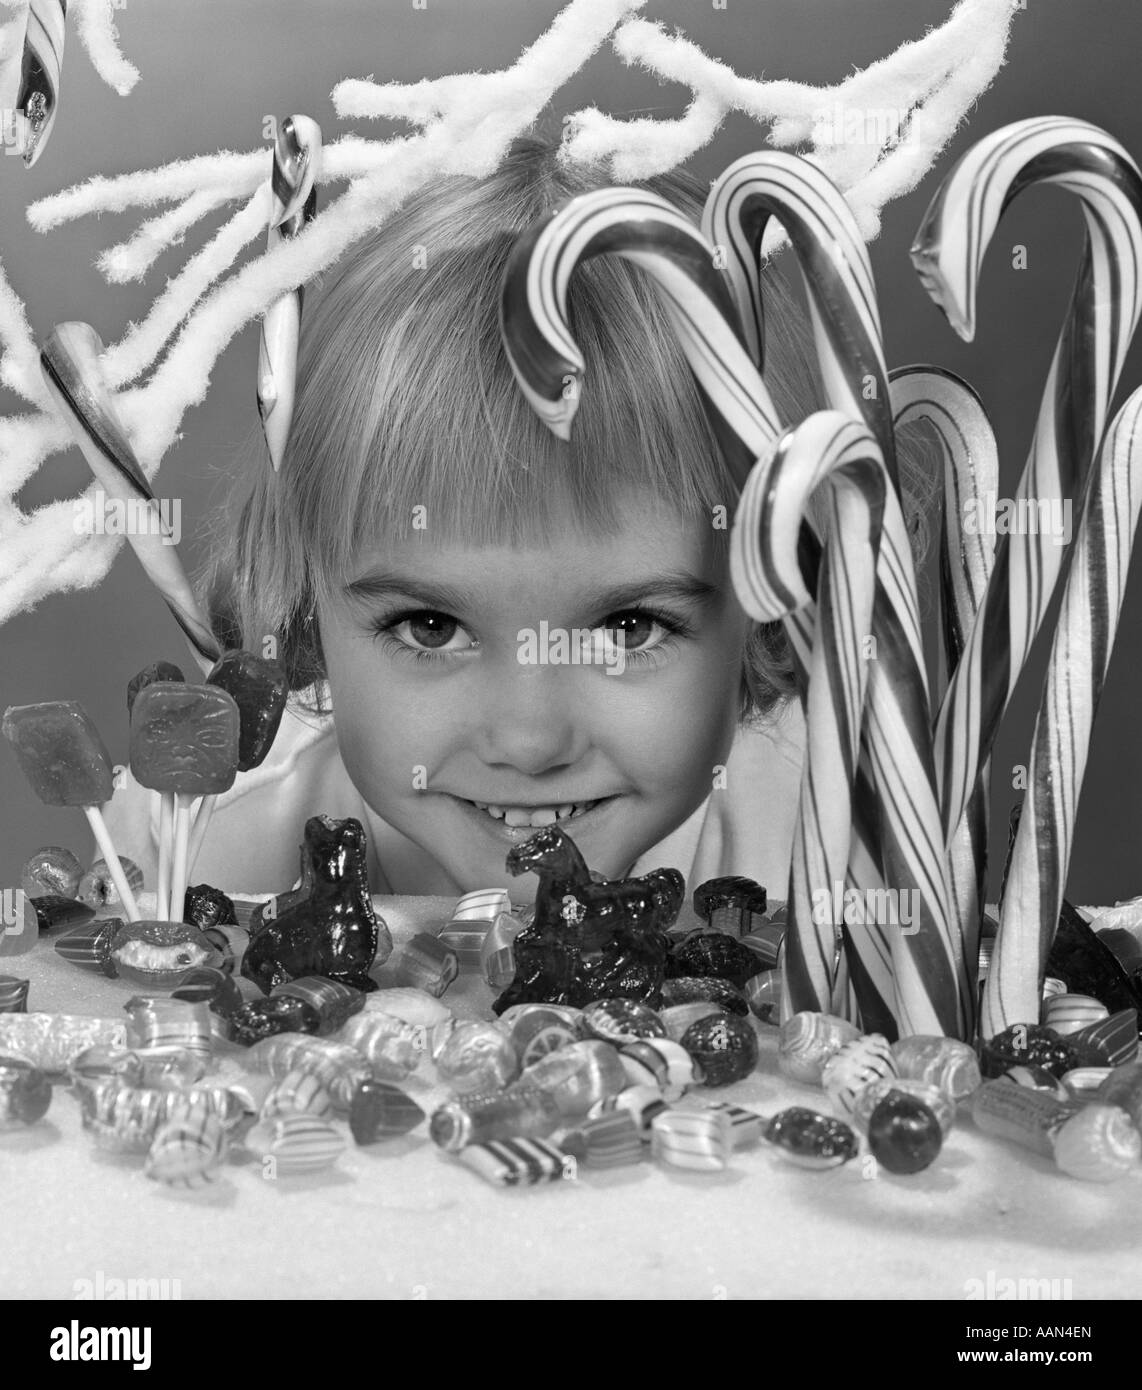 1950s 196s SMILING LITTLE BLOND GIRL PEEKING IN WINDOW CANDY STORE DISPLAY EYES WIDE LOOKING AT CAMERA Stock Photo